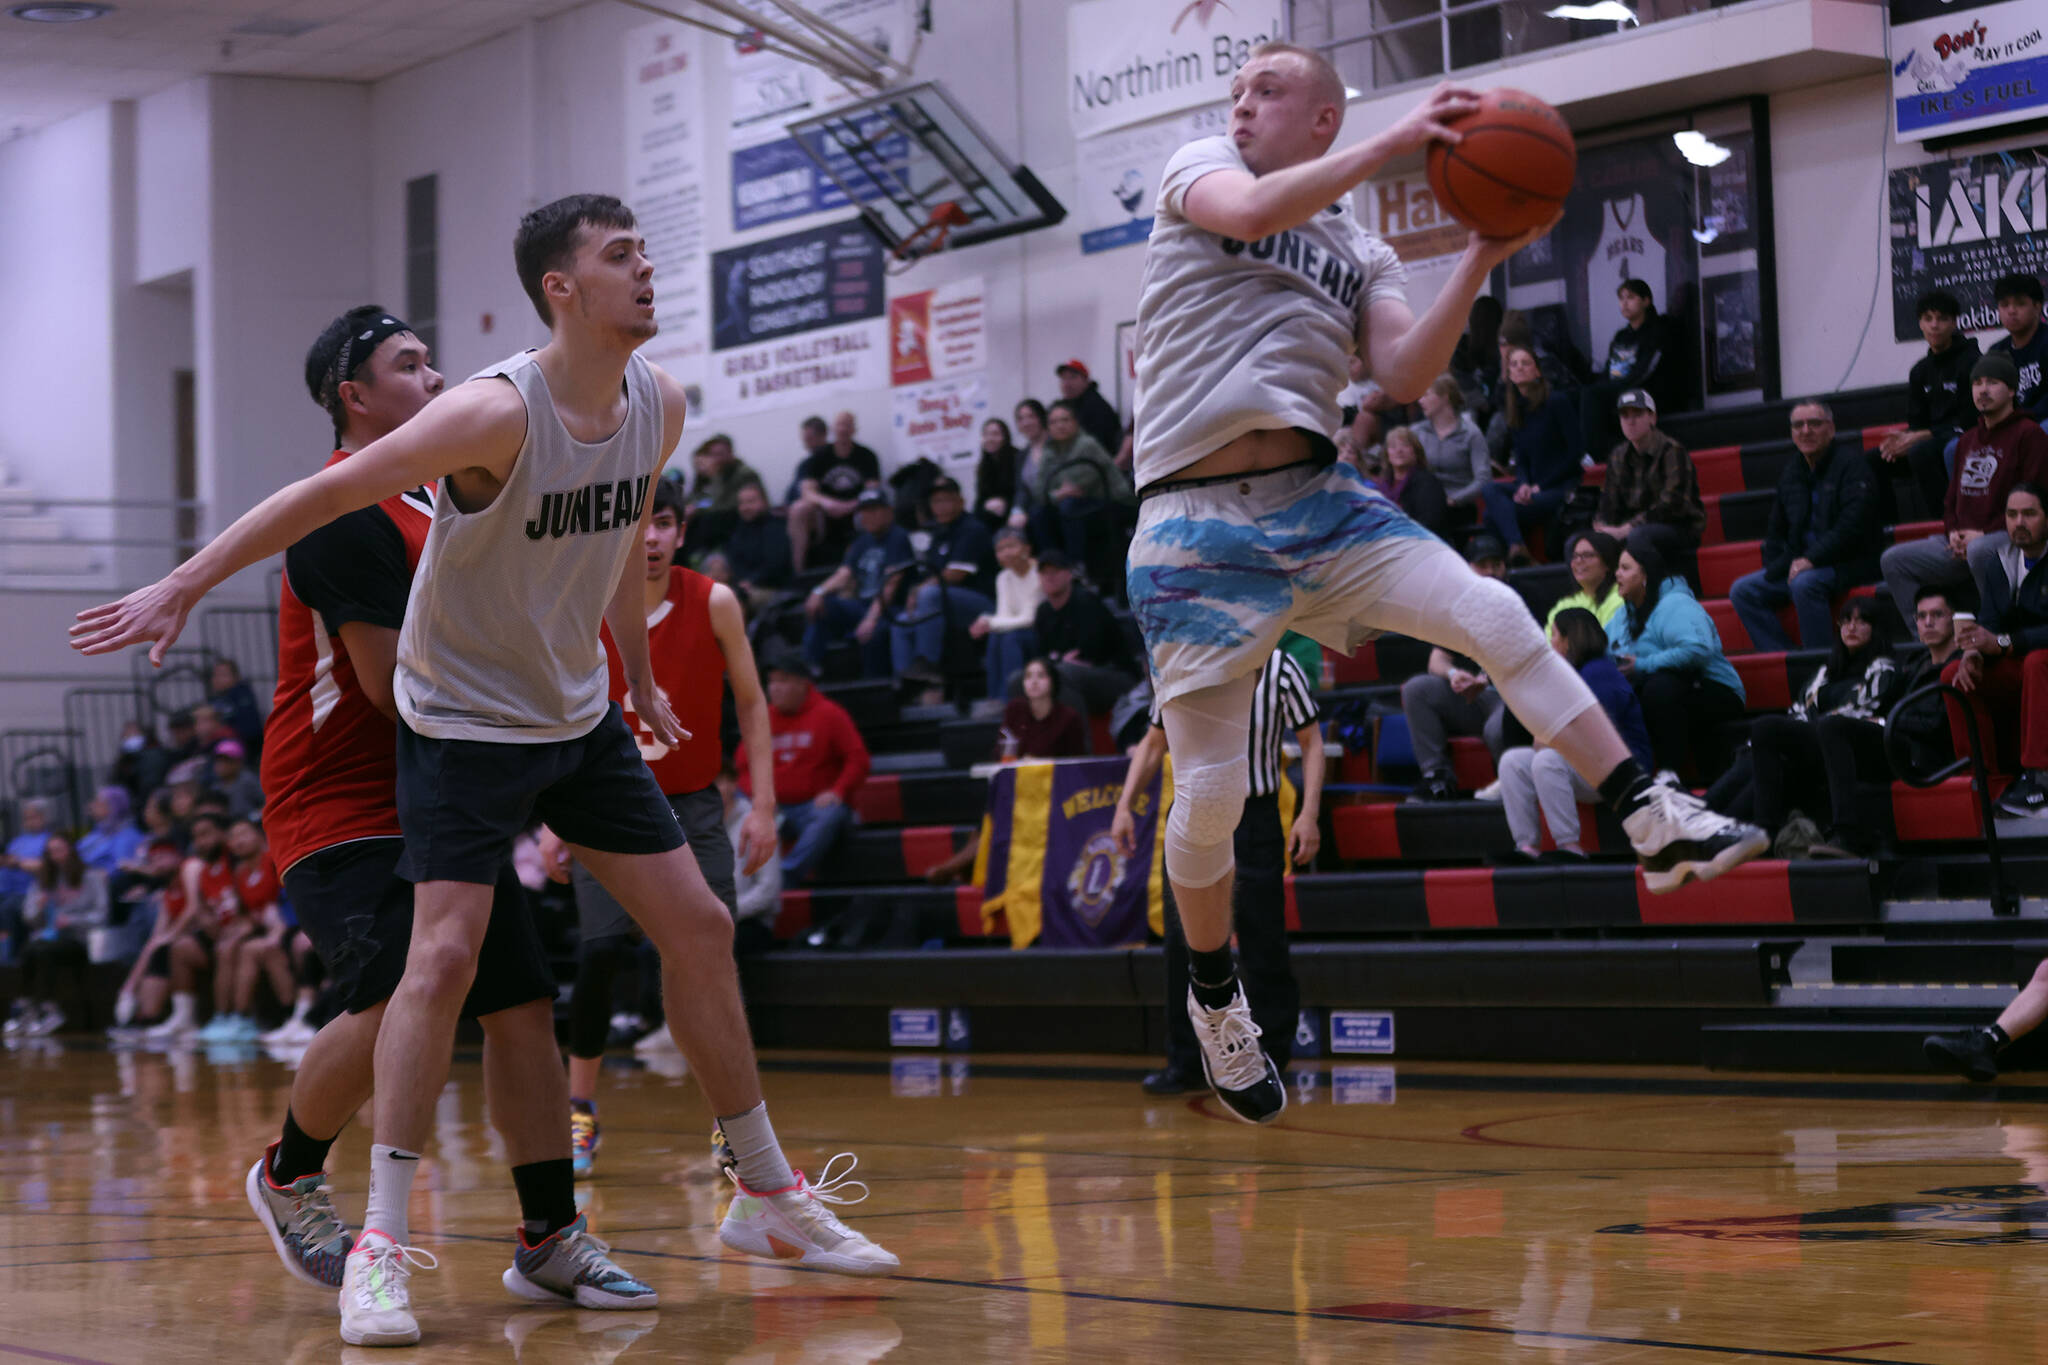 Juneau’s Kaleb Tompkins boxes out while teammate Chase Saviers comes down with a rebound in the first half of a Juneau win against Kake in the first round of the Gold Medal Basketball Tournament. (Ben Hohenstatt / Juneau Empire)